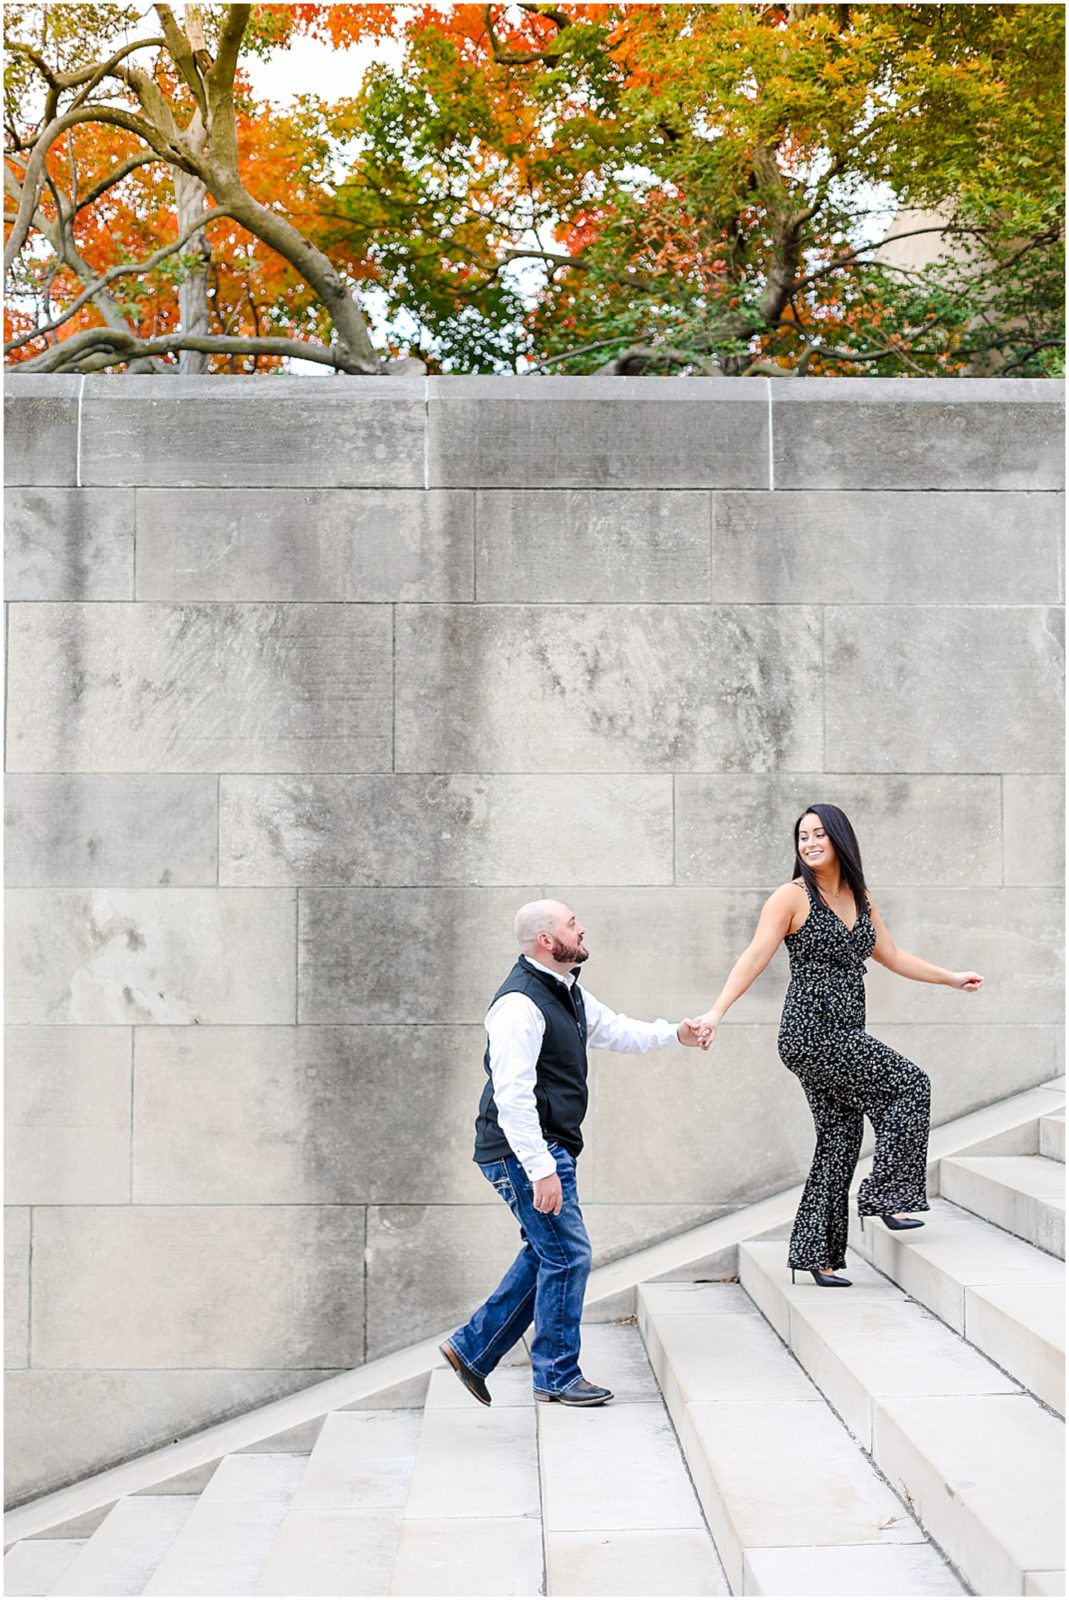 loose park fall engagement 